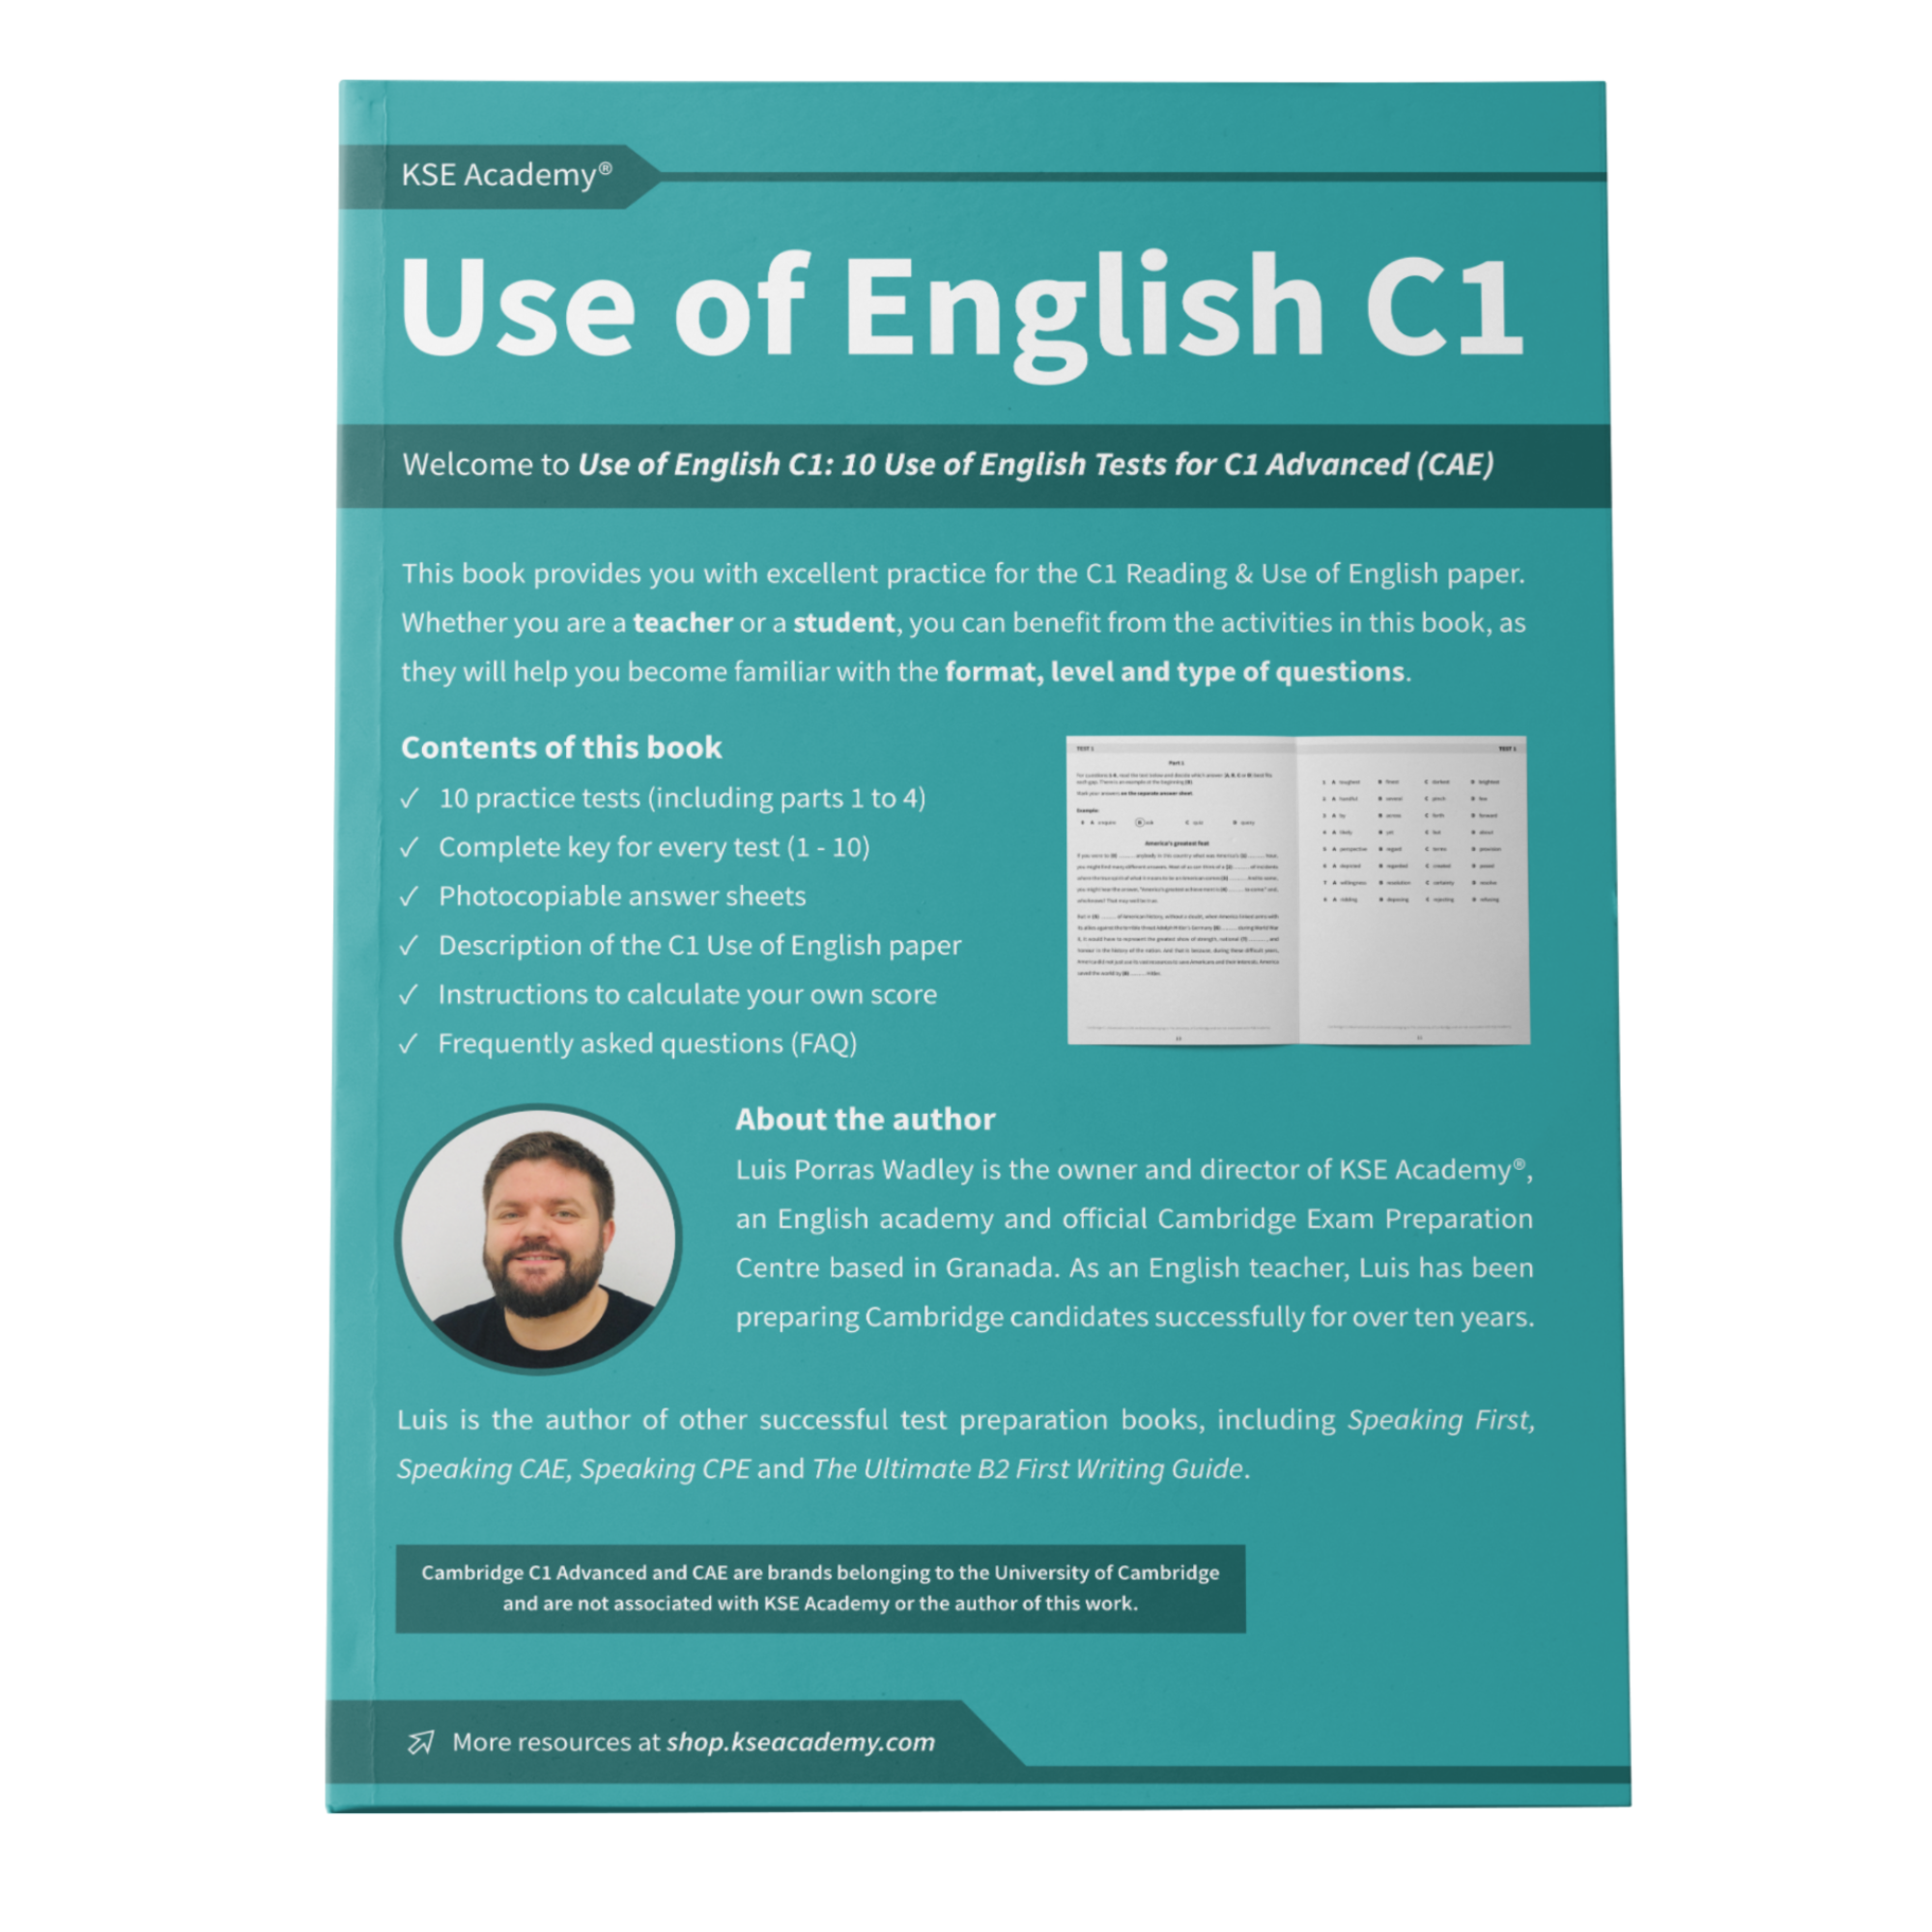 Use of English C1: 10 Practice Tests for C1 Advanced (Vol. 1)